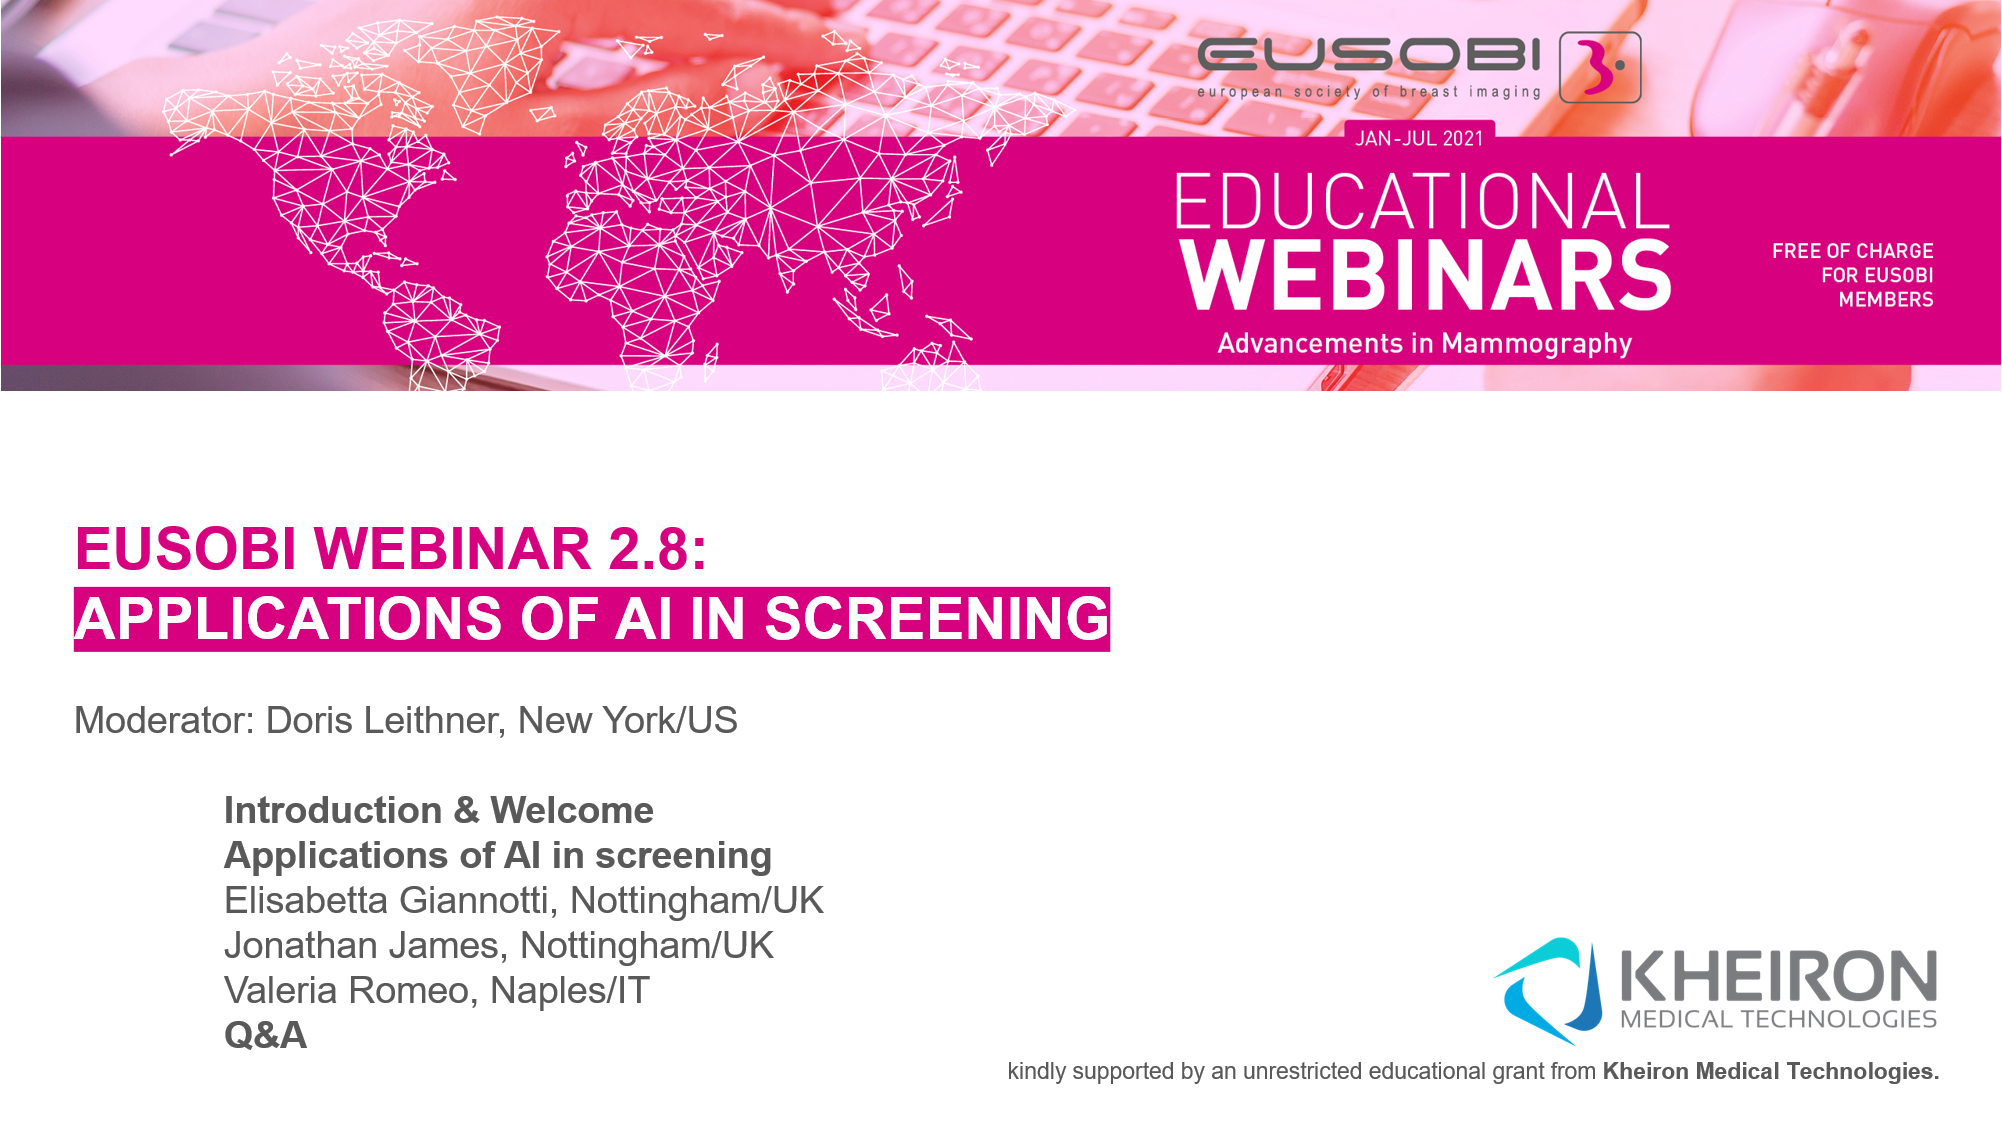 2.8 / Applications of AI in screening